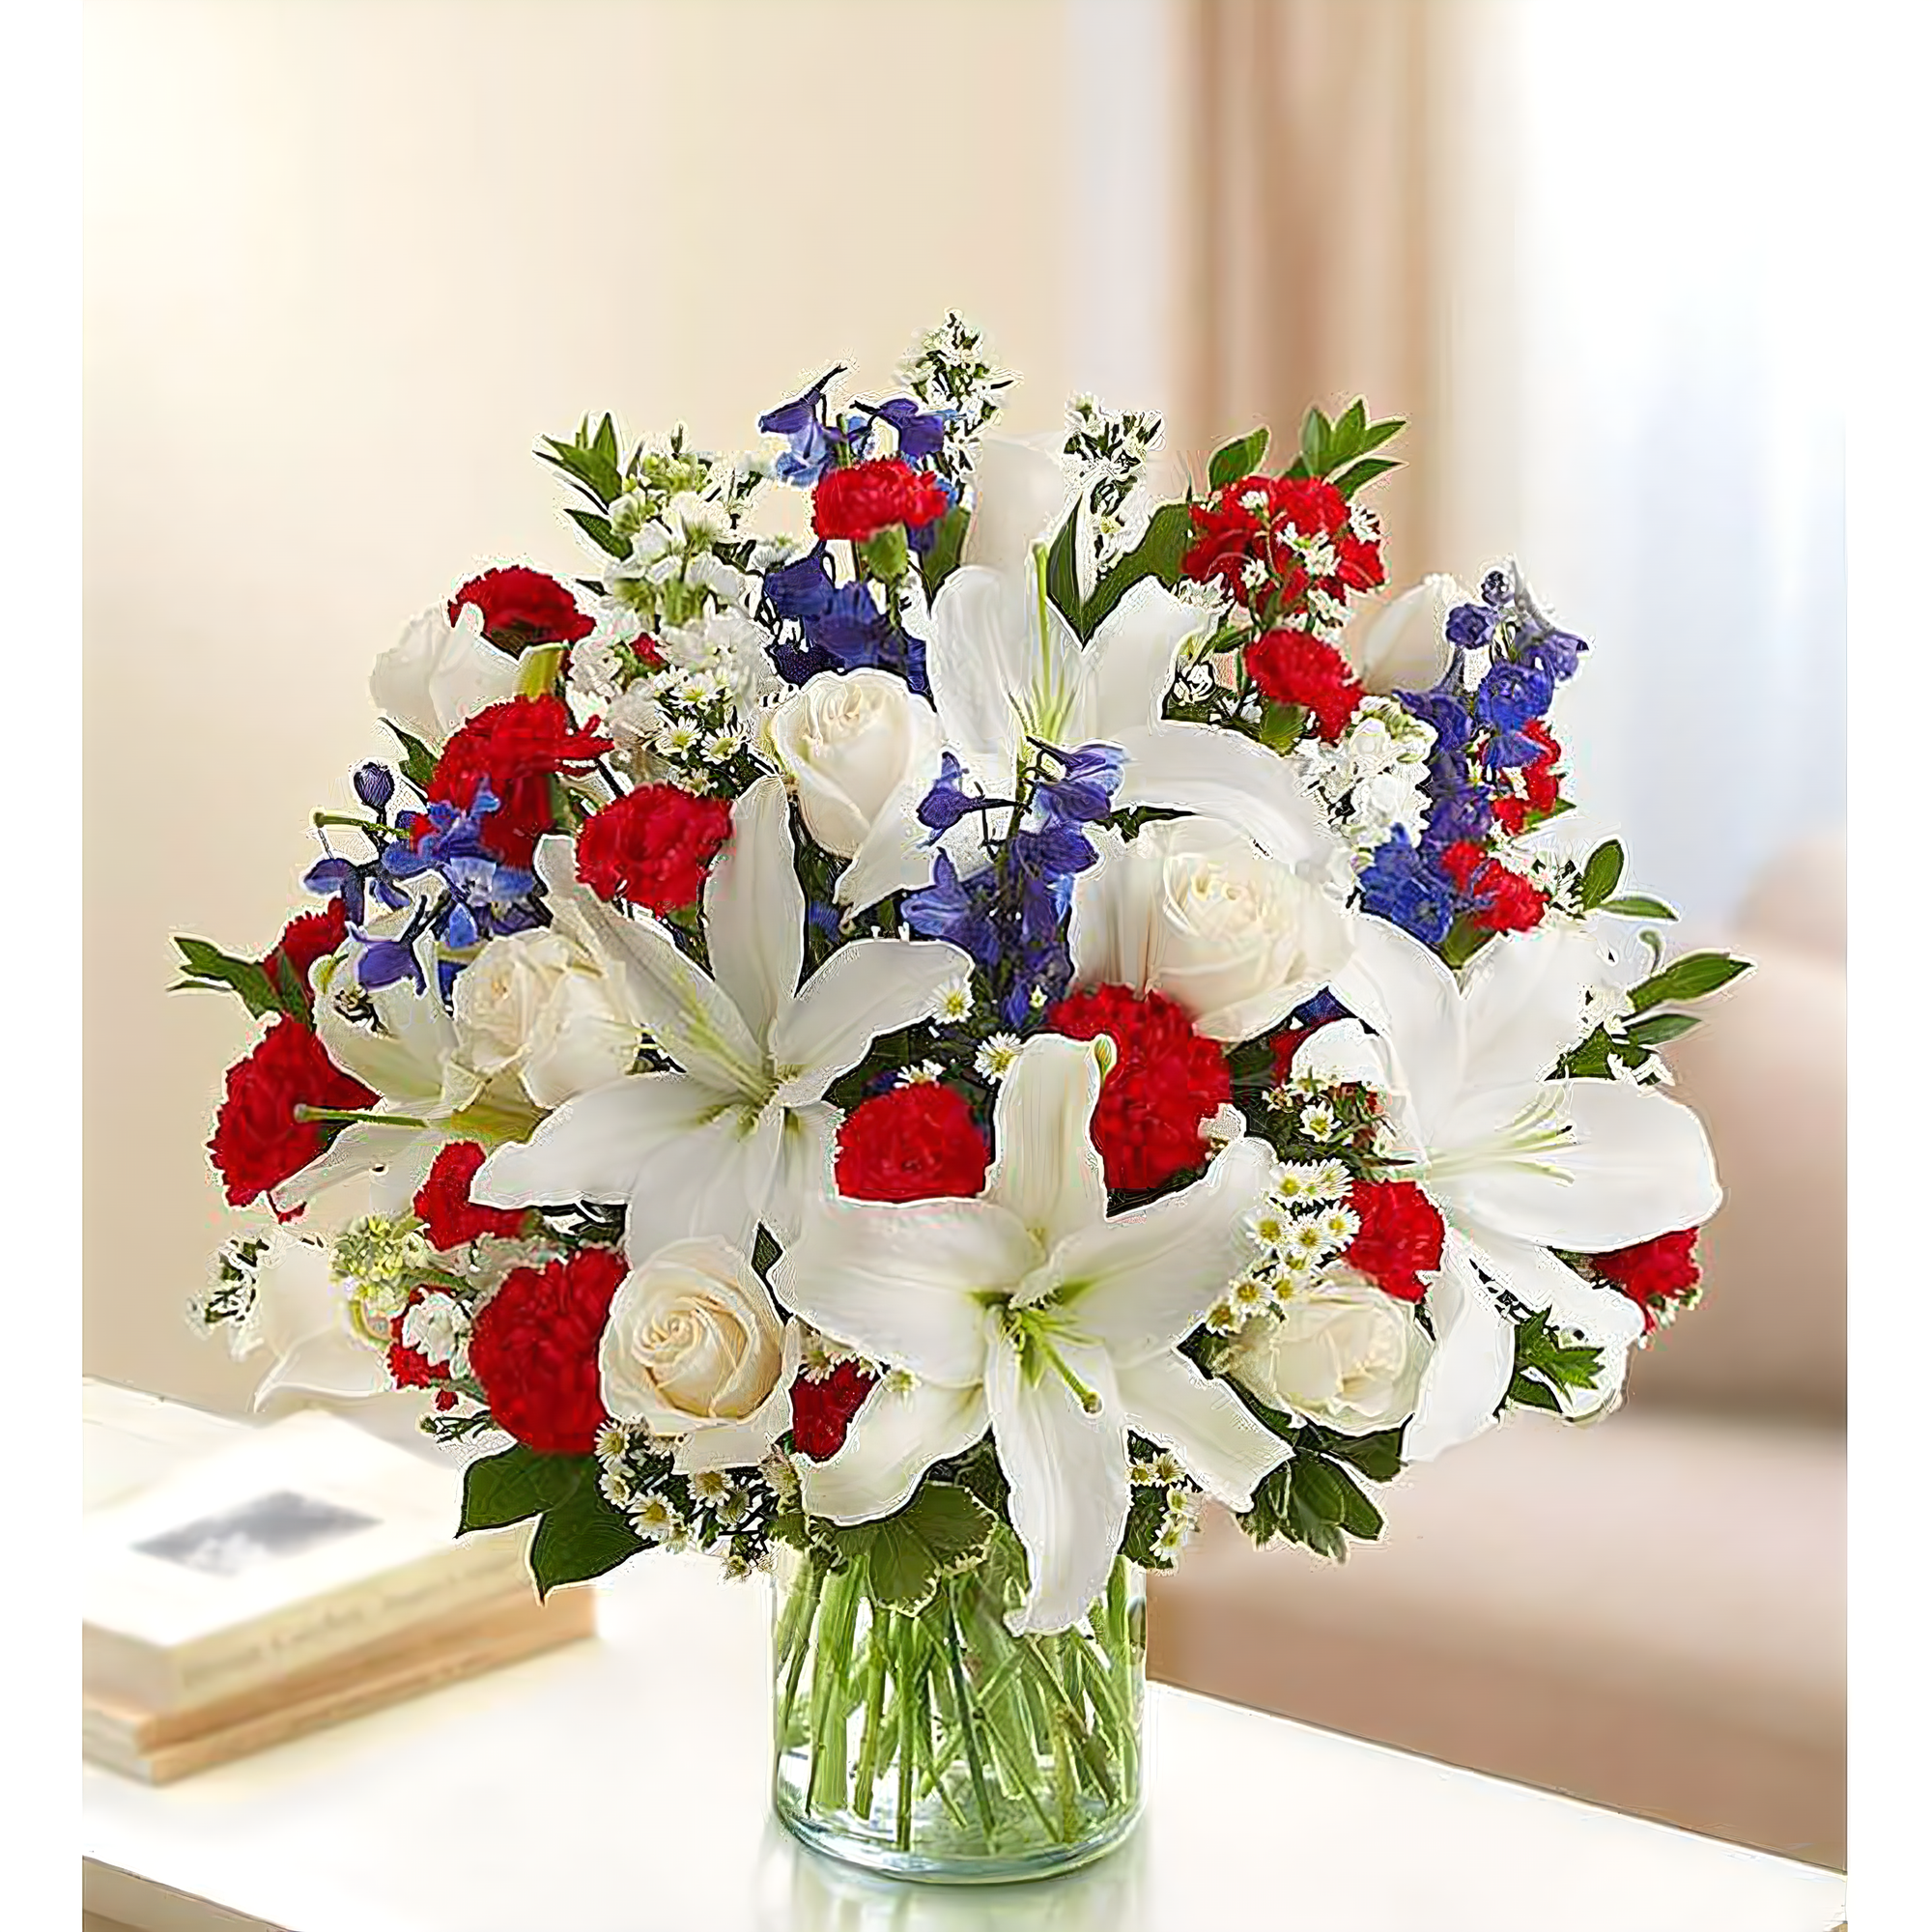 Sincerest Sorrow - Red, White and Blue - Funeral > Vase Arrangements